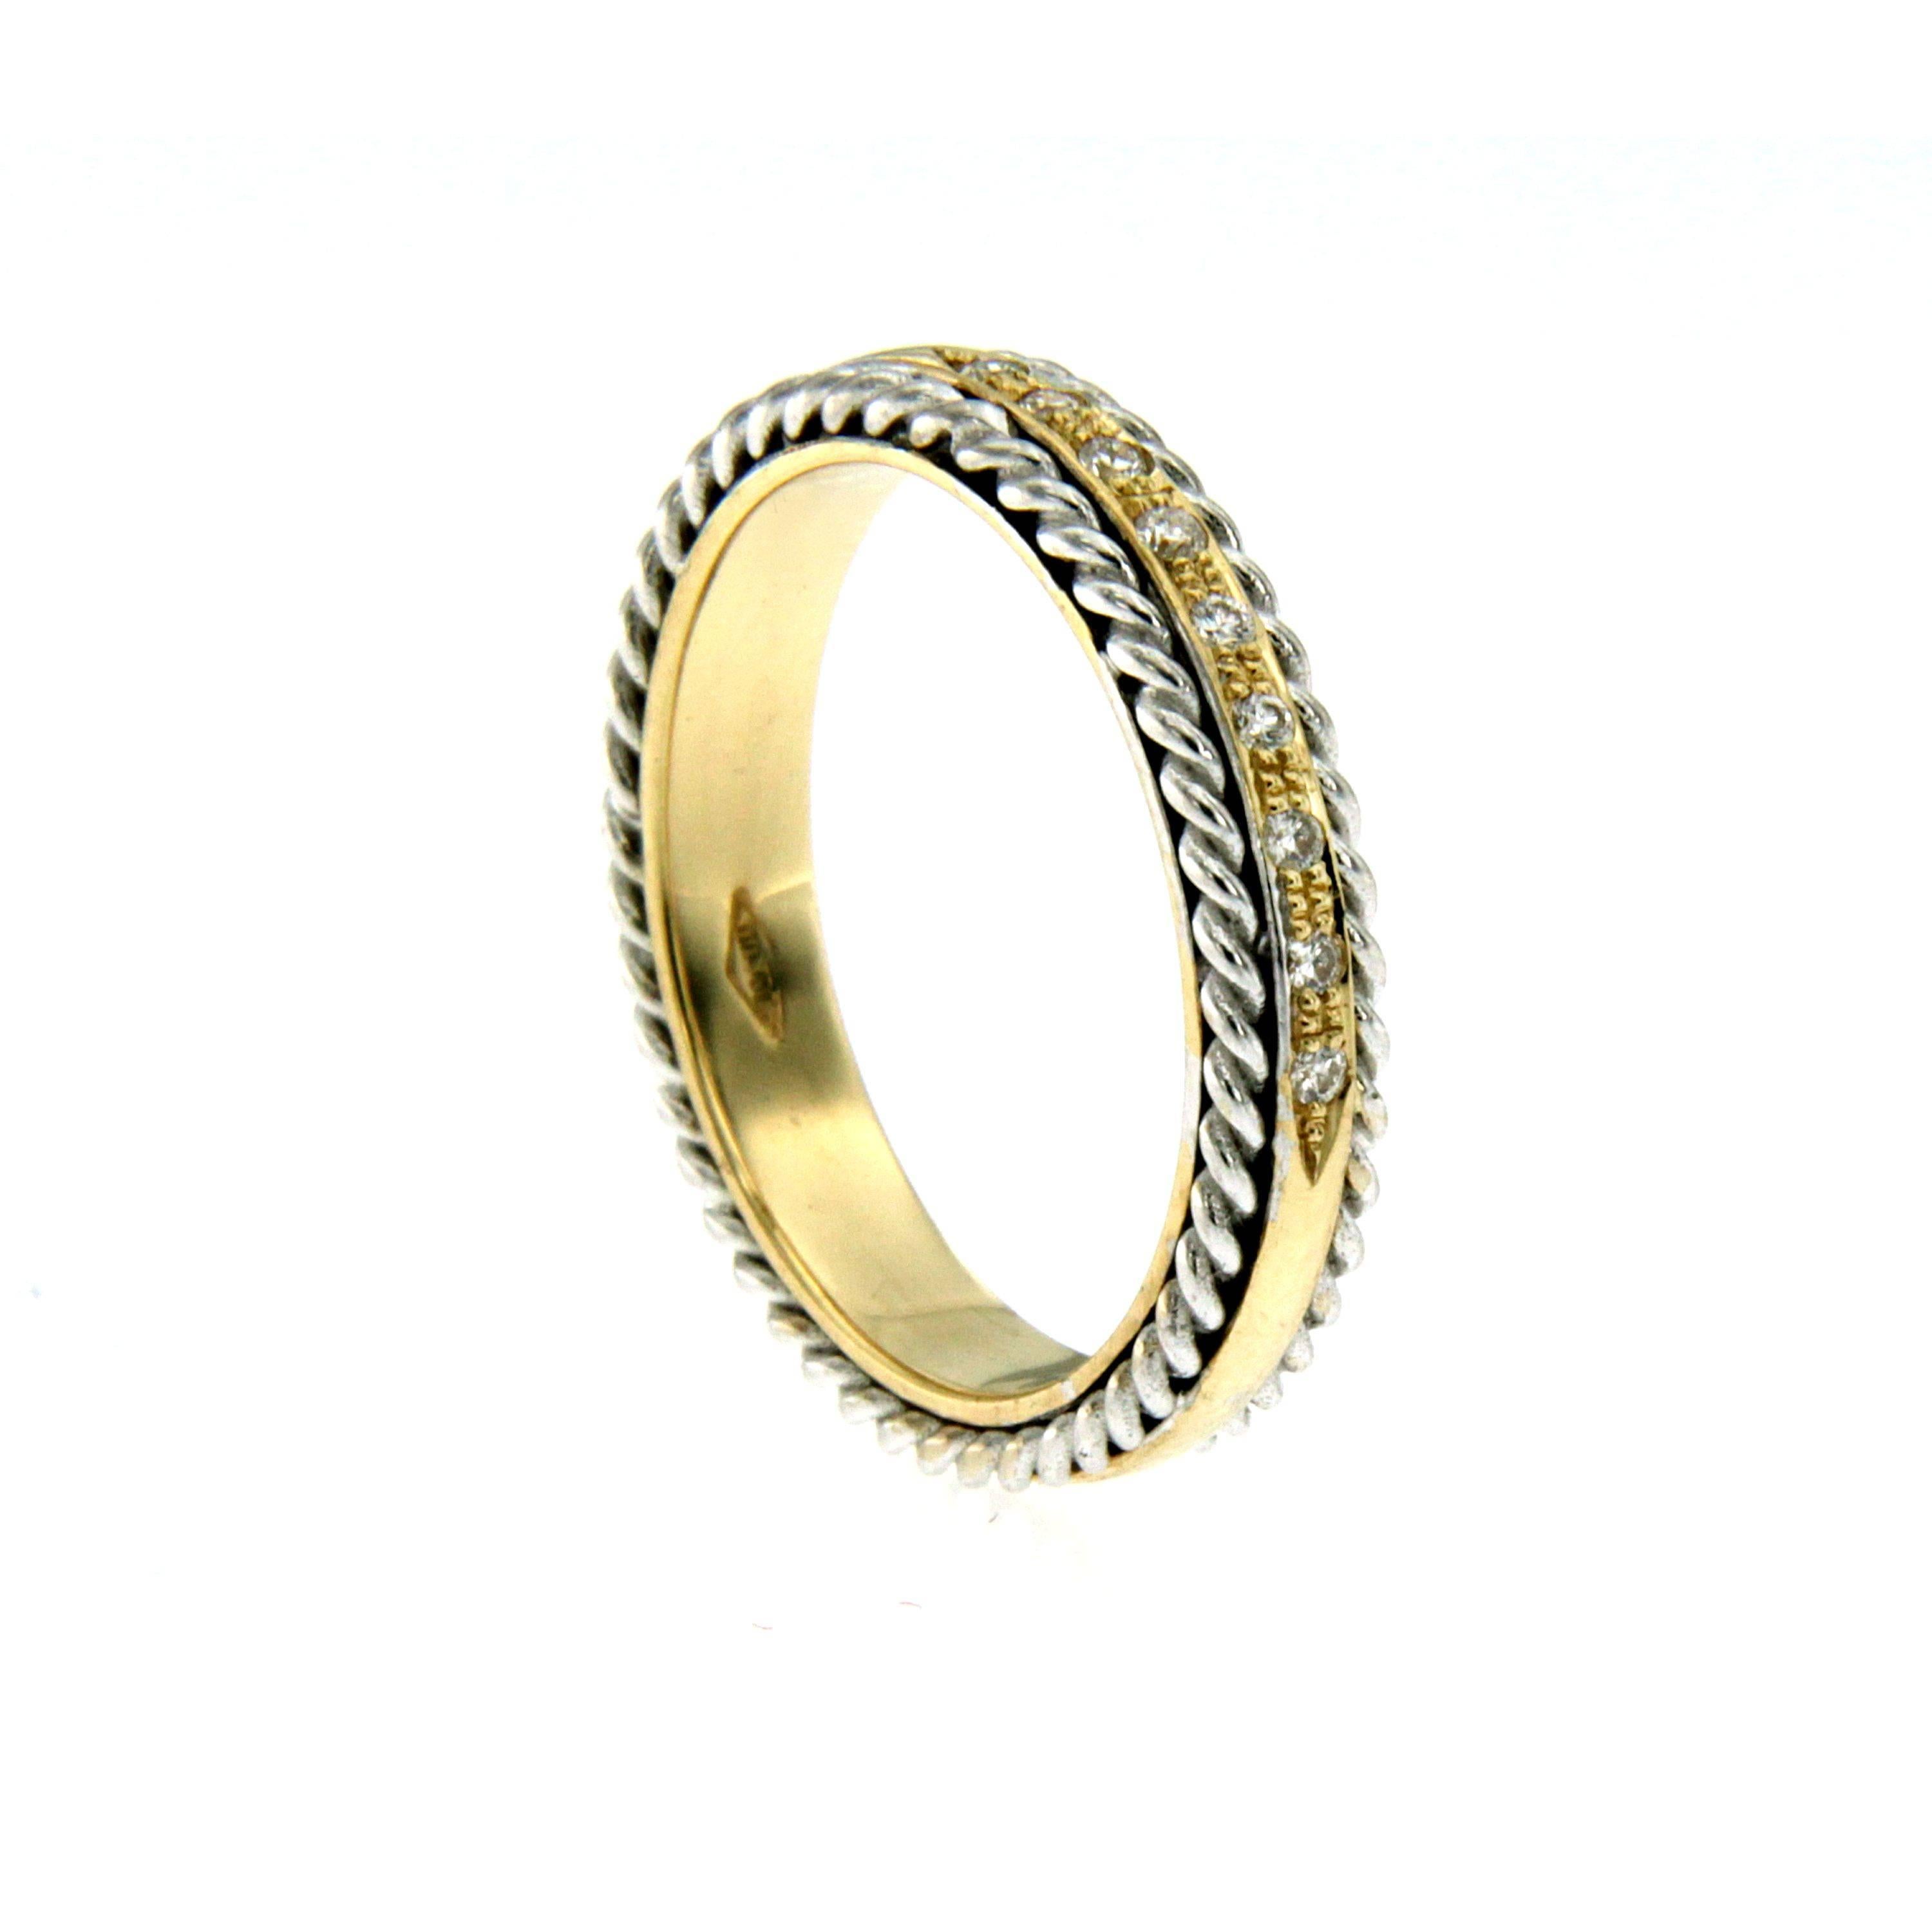 Design Diamond Wedding Band Ring In New Condition For Sale In Napoli, Italy